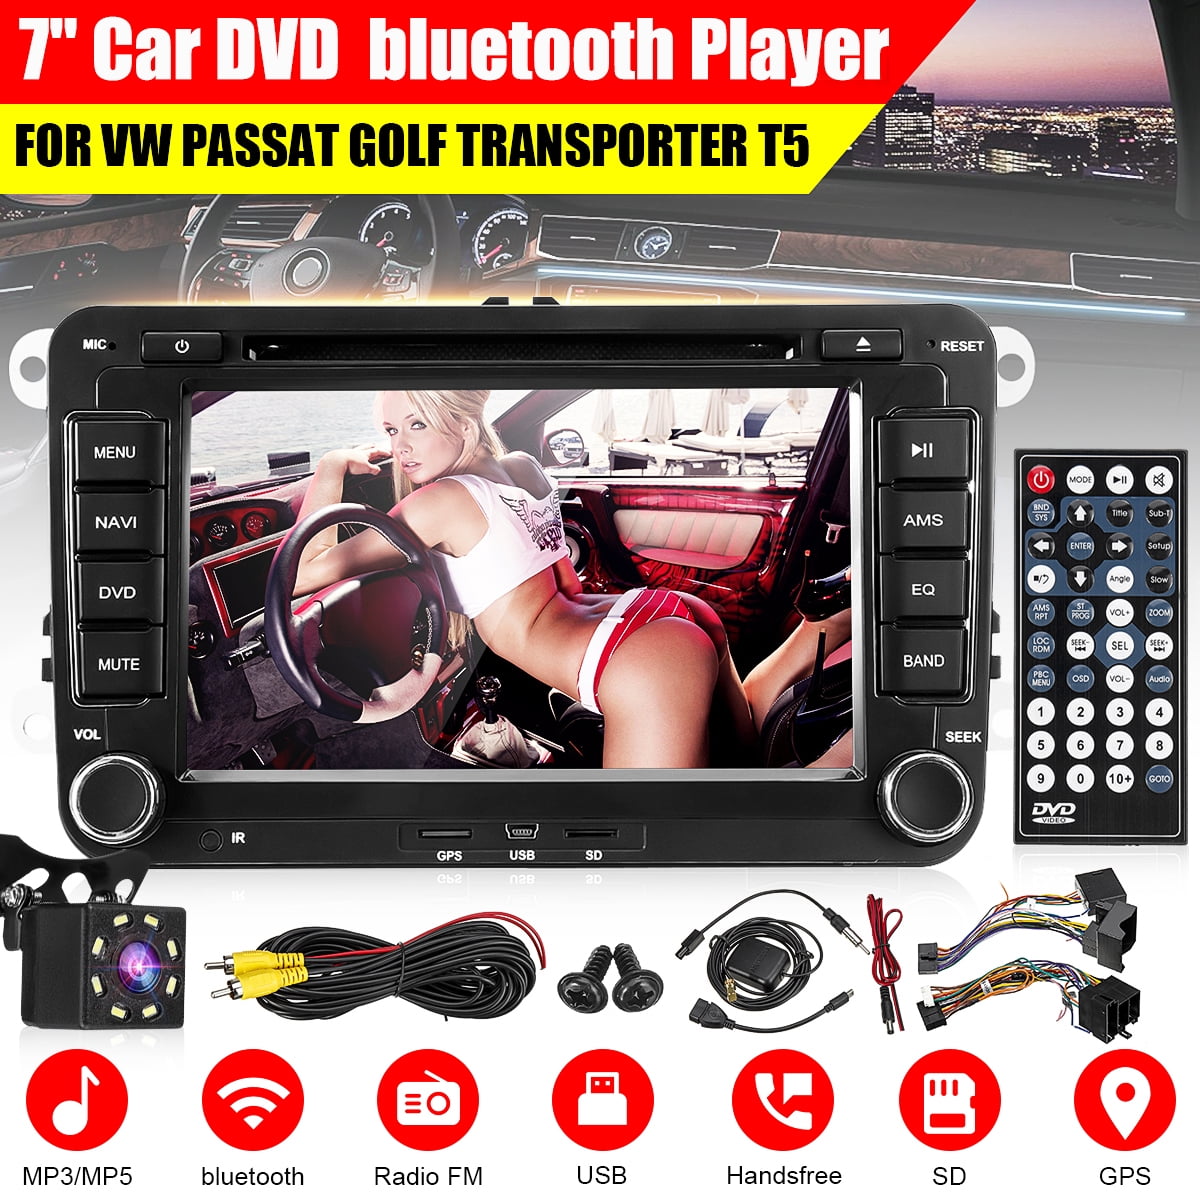 7" DVD bluetooth Player Radio GPS Sat Stereo & Camera For